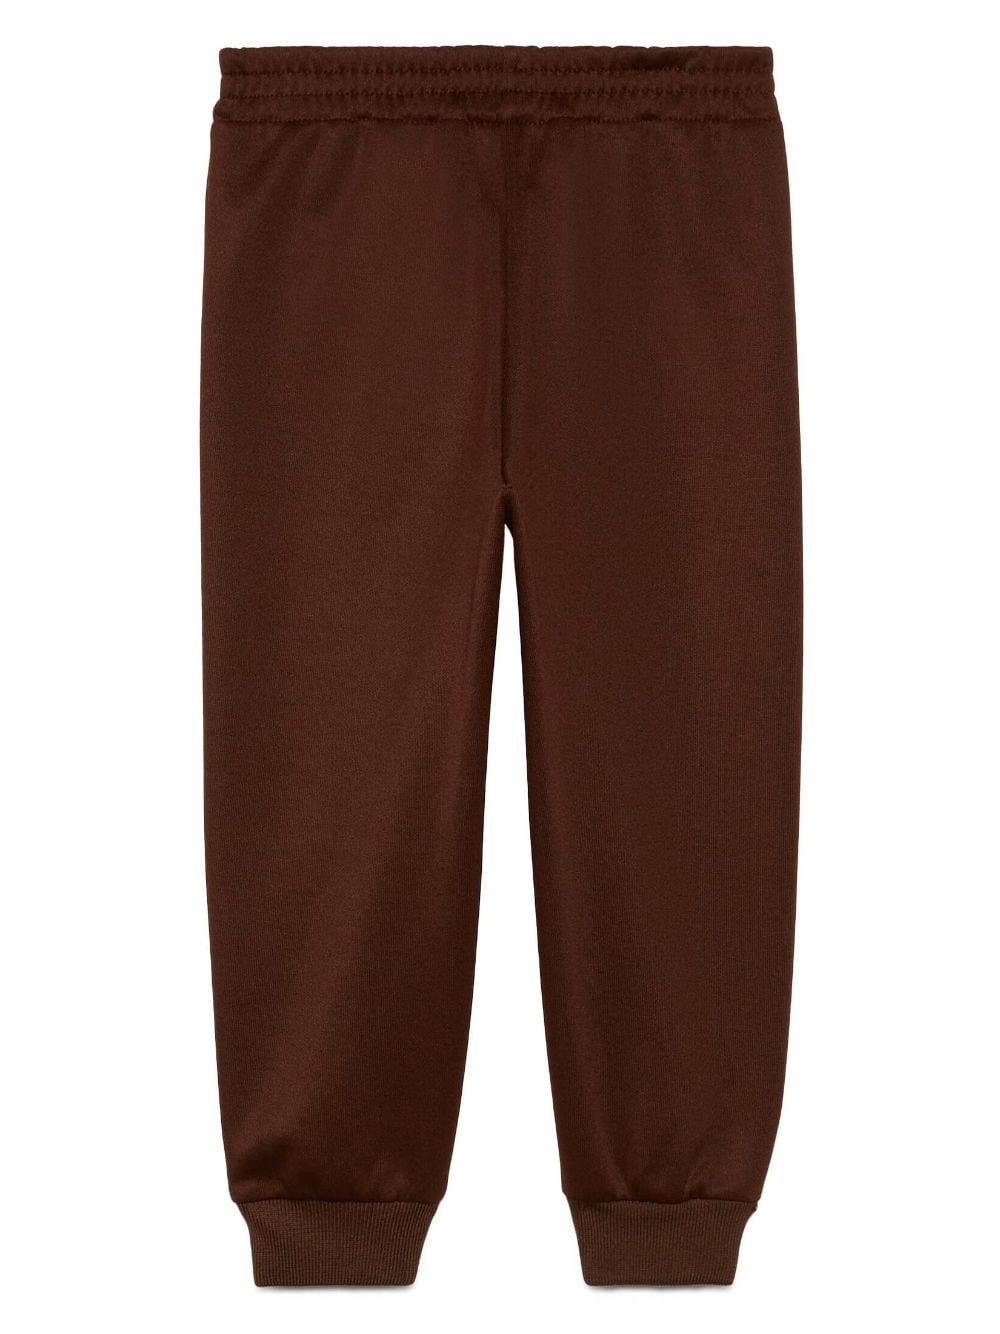 Beige and brown sports trousers for children